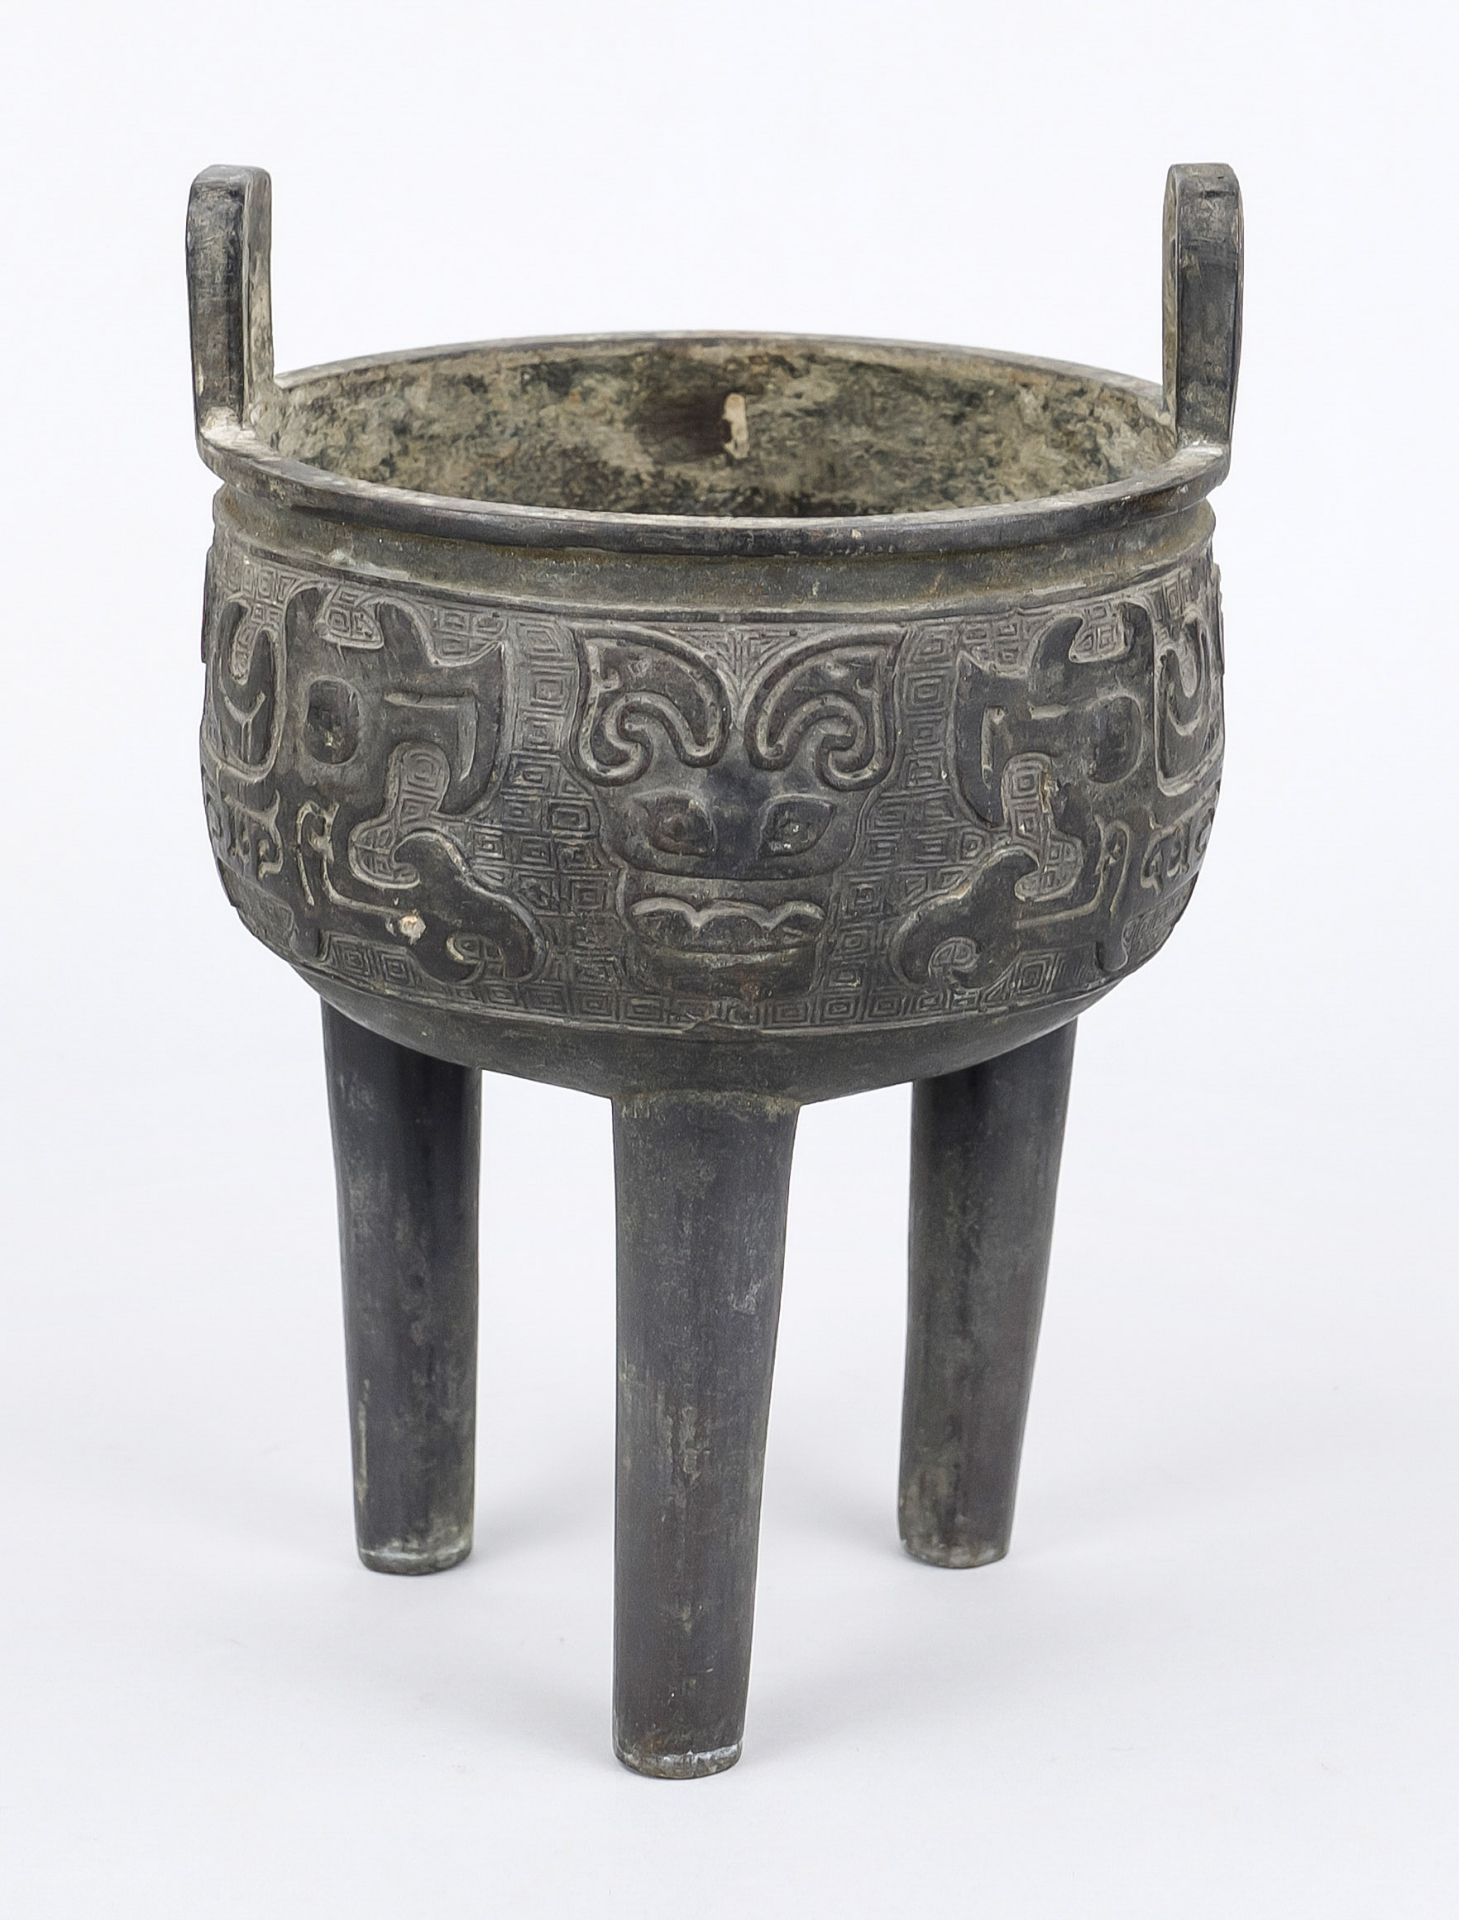 Tripod censer in archaic style, China, bronze. Round vessel with surrounding taotie relief